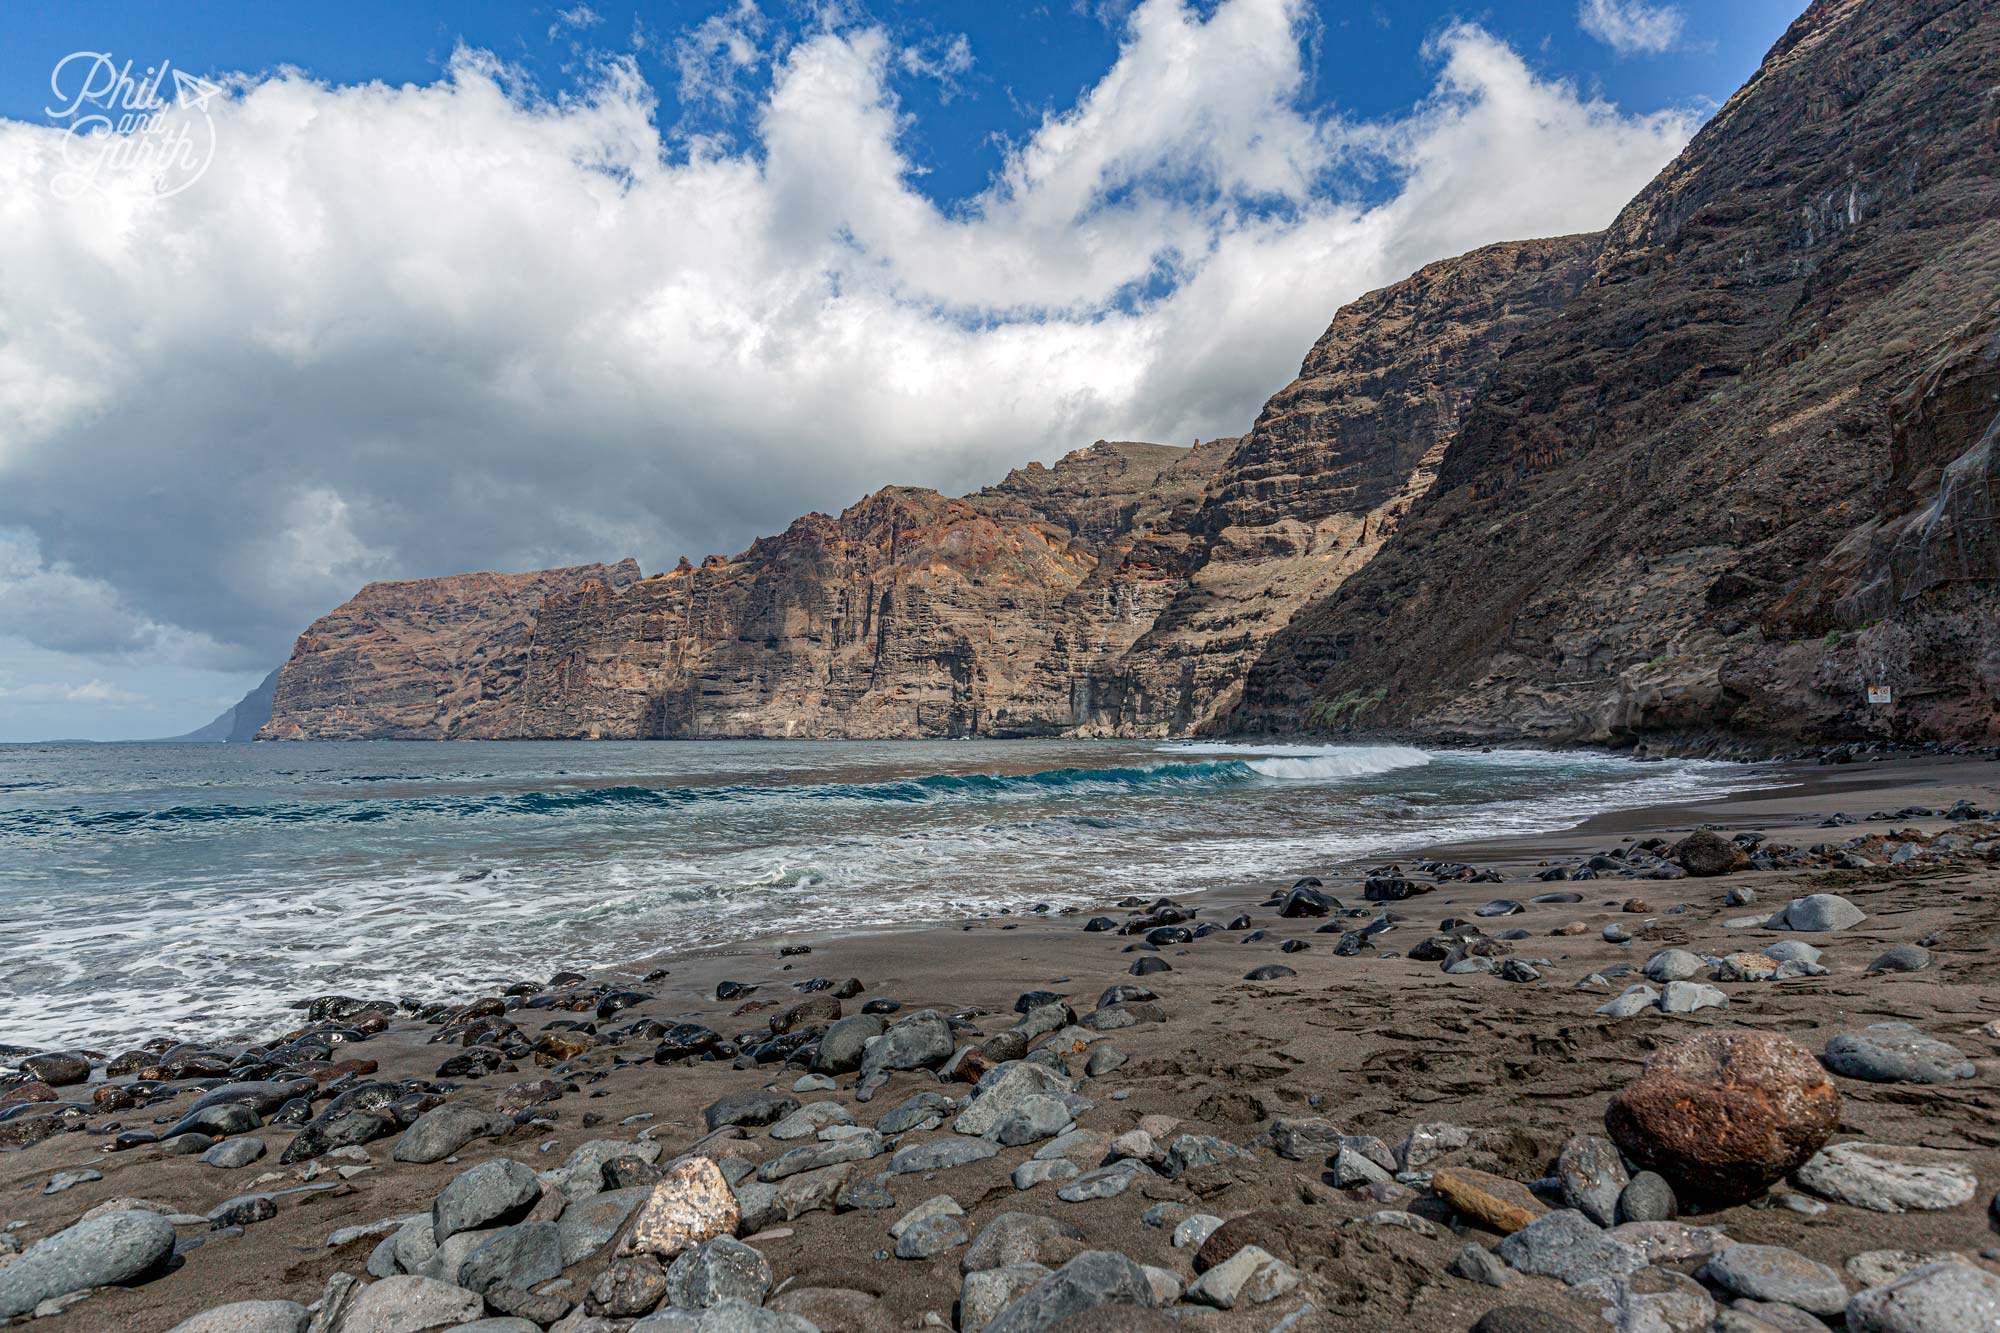 The striking giant rock face and cliffs of Los Gigantes